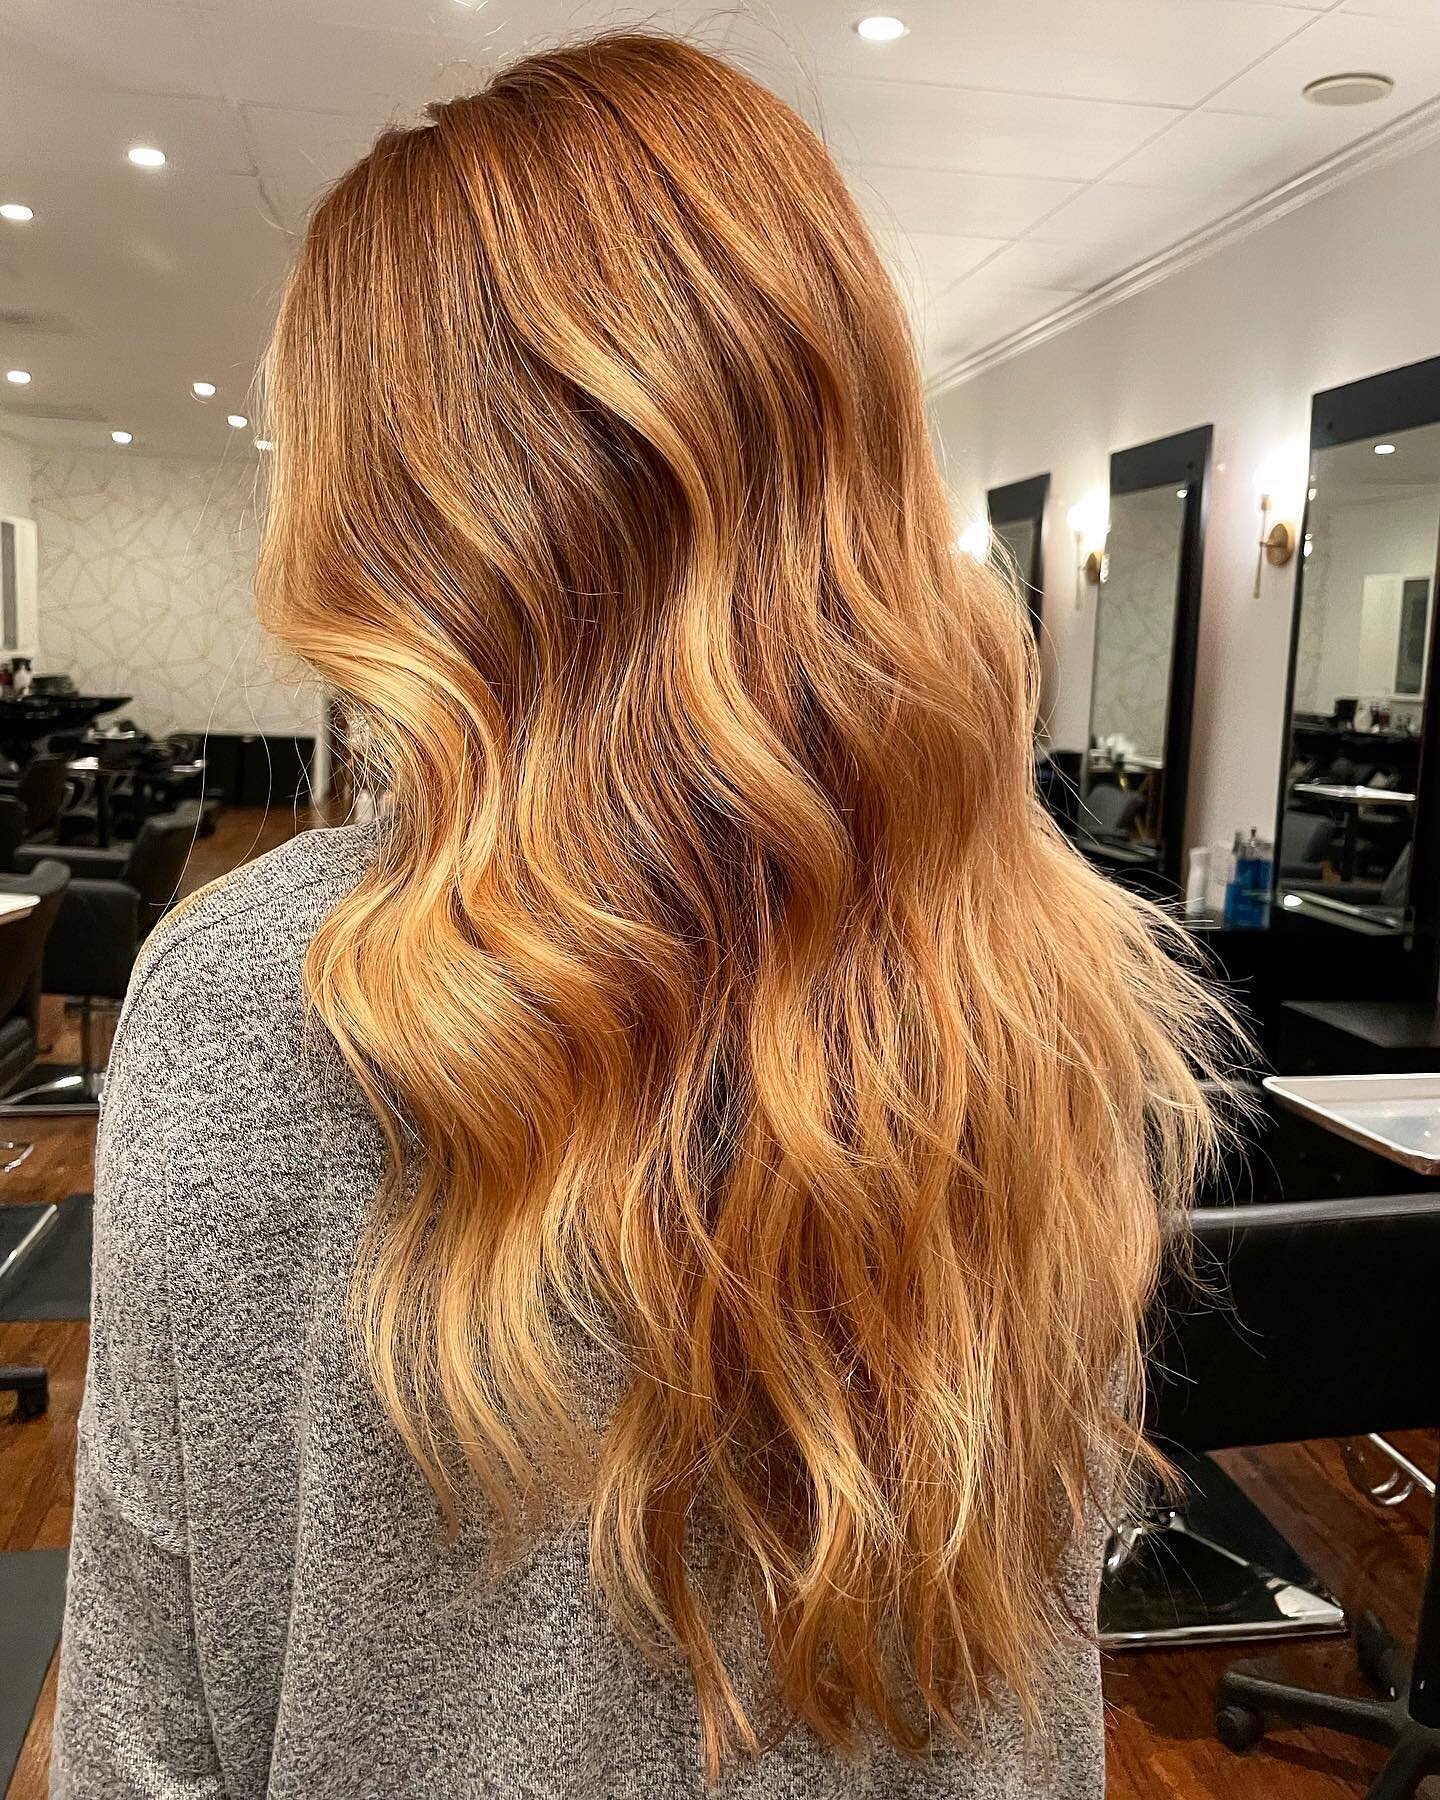 Warming up for the winter? This gal got a base color to get those ginger vibes, low lights, full blonding and a cut by @tayhernehair to get ready for the holiday season. 

&bull;
&bull;
&bull; #sfcolorcollective #sanfranciscosalon #bestofsf #personal